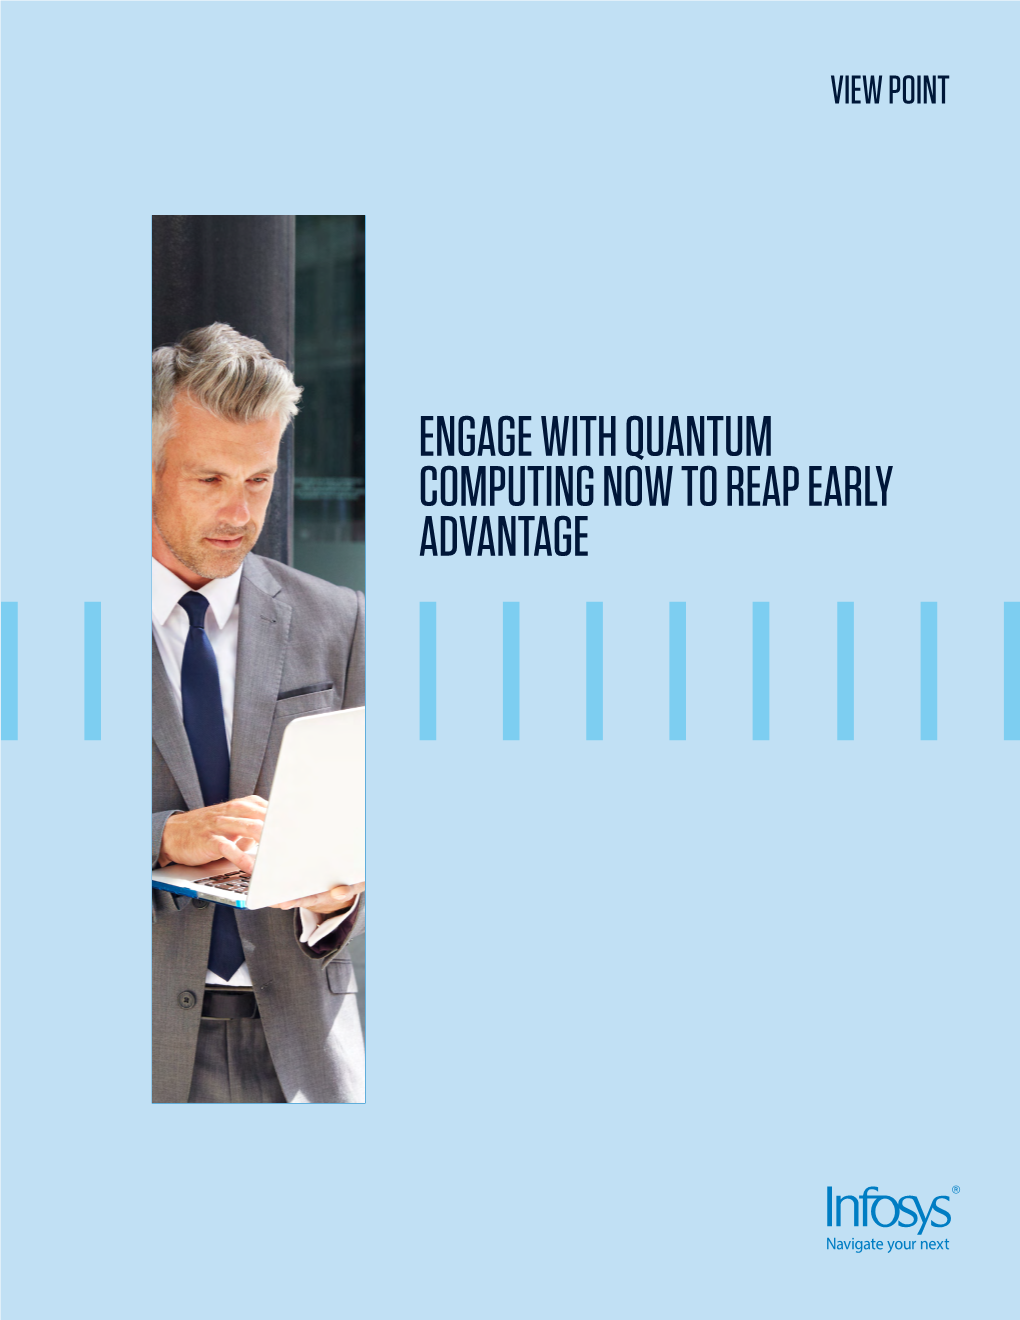 Engage with Quantum Computing Now to Reap Early Advantage